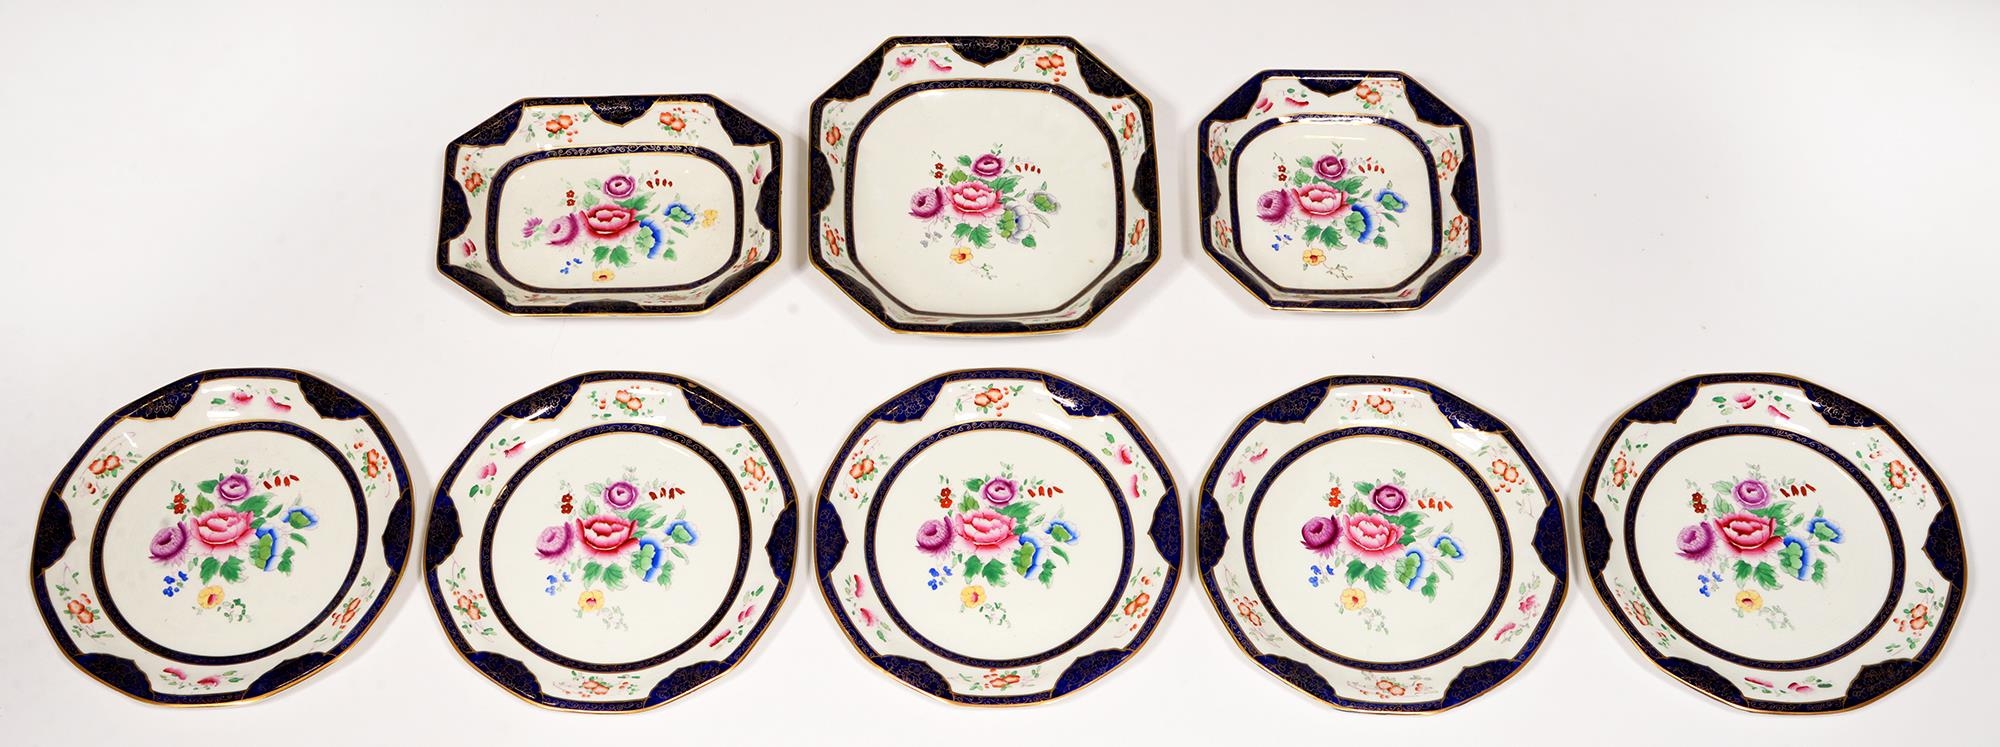 A Wedgwood & Co earthenware floral dessert service, 1930s (8)